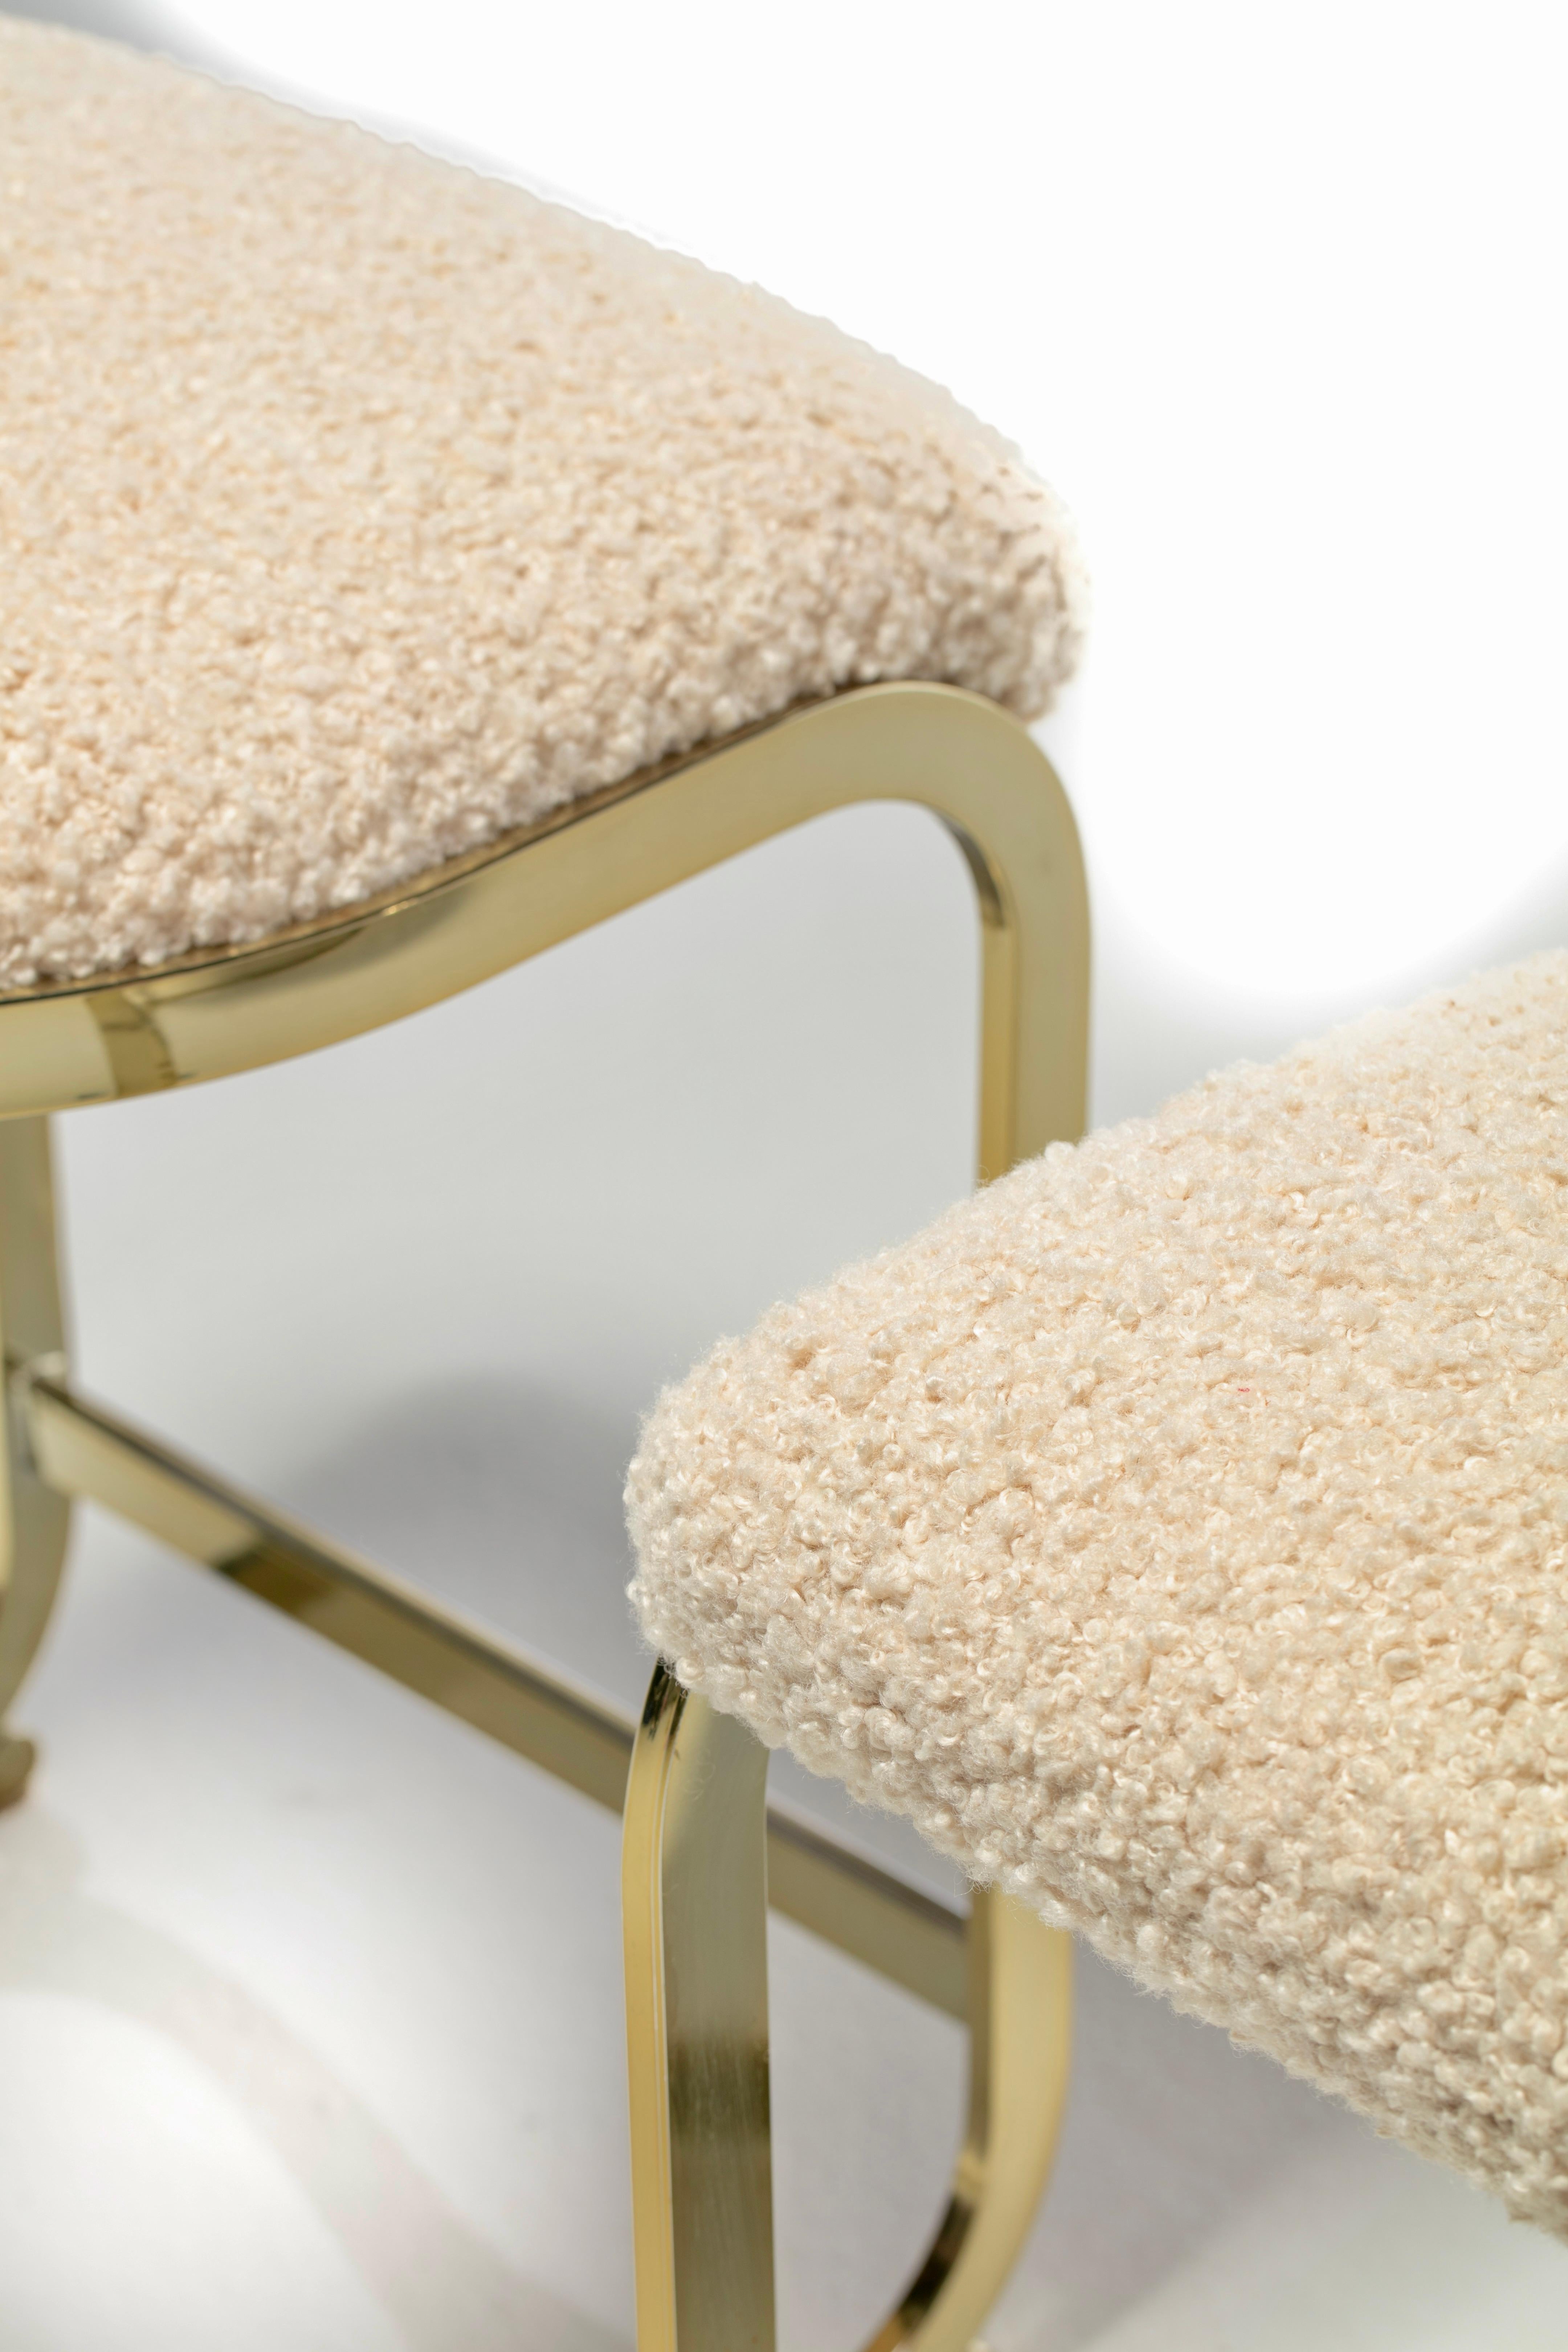 Set of 3 Design Institute of America Brass Stools in Ivory White Bouclé, c. 1980 For Sale 10